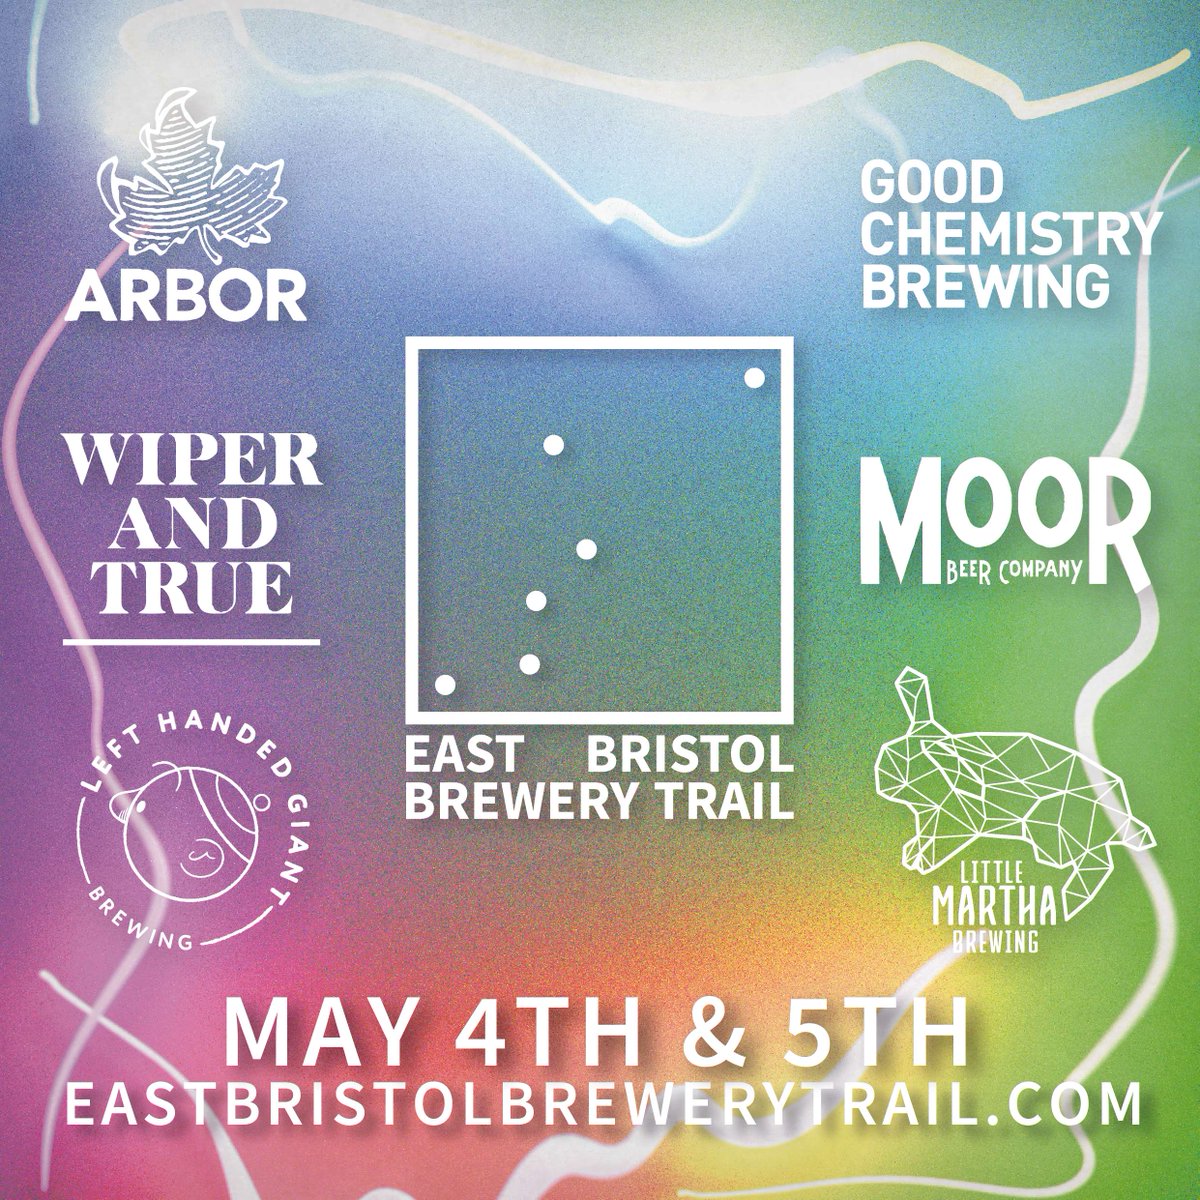 JOIN US ON THE TRAIL 🍻 It's just 3 weeks until the East Bristol Brewery trail! Visit @ArborAles, @GoodChemBrew, @DrinkMoorBeer, @LilMarthaBrew, @LHGBrewingCo along the way… and @WiperandTrueTap of course. Get it marked in your diaries.